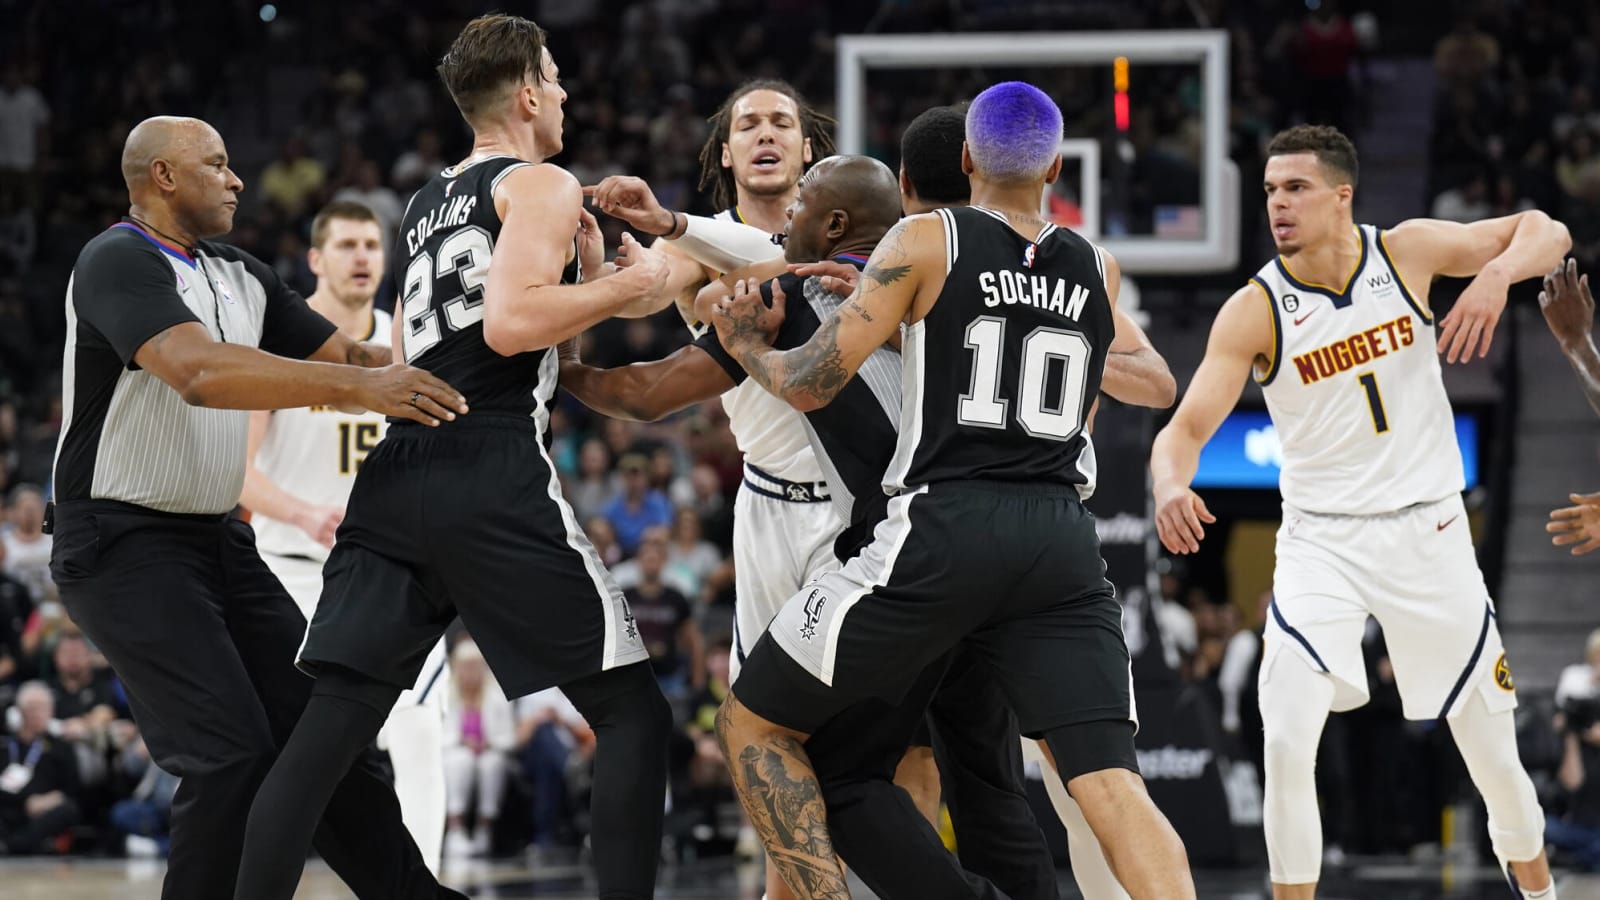 Michael Porter Jr. appears to grab Zach Collins by neck